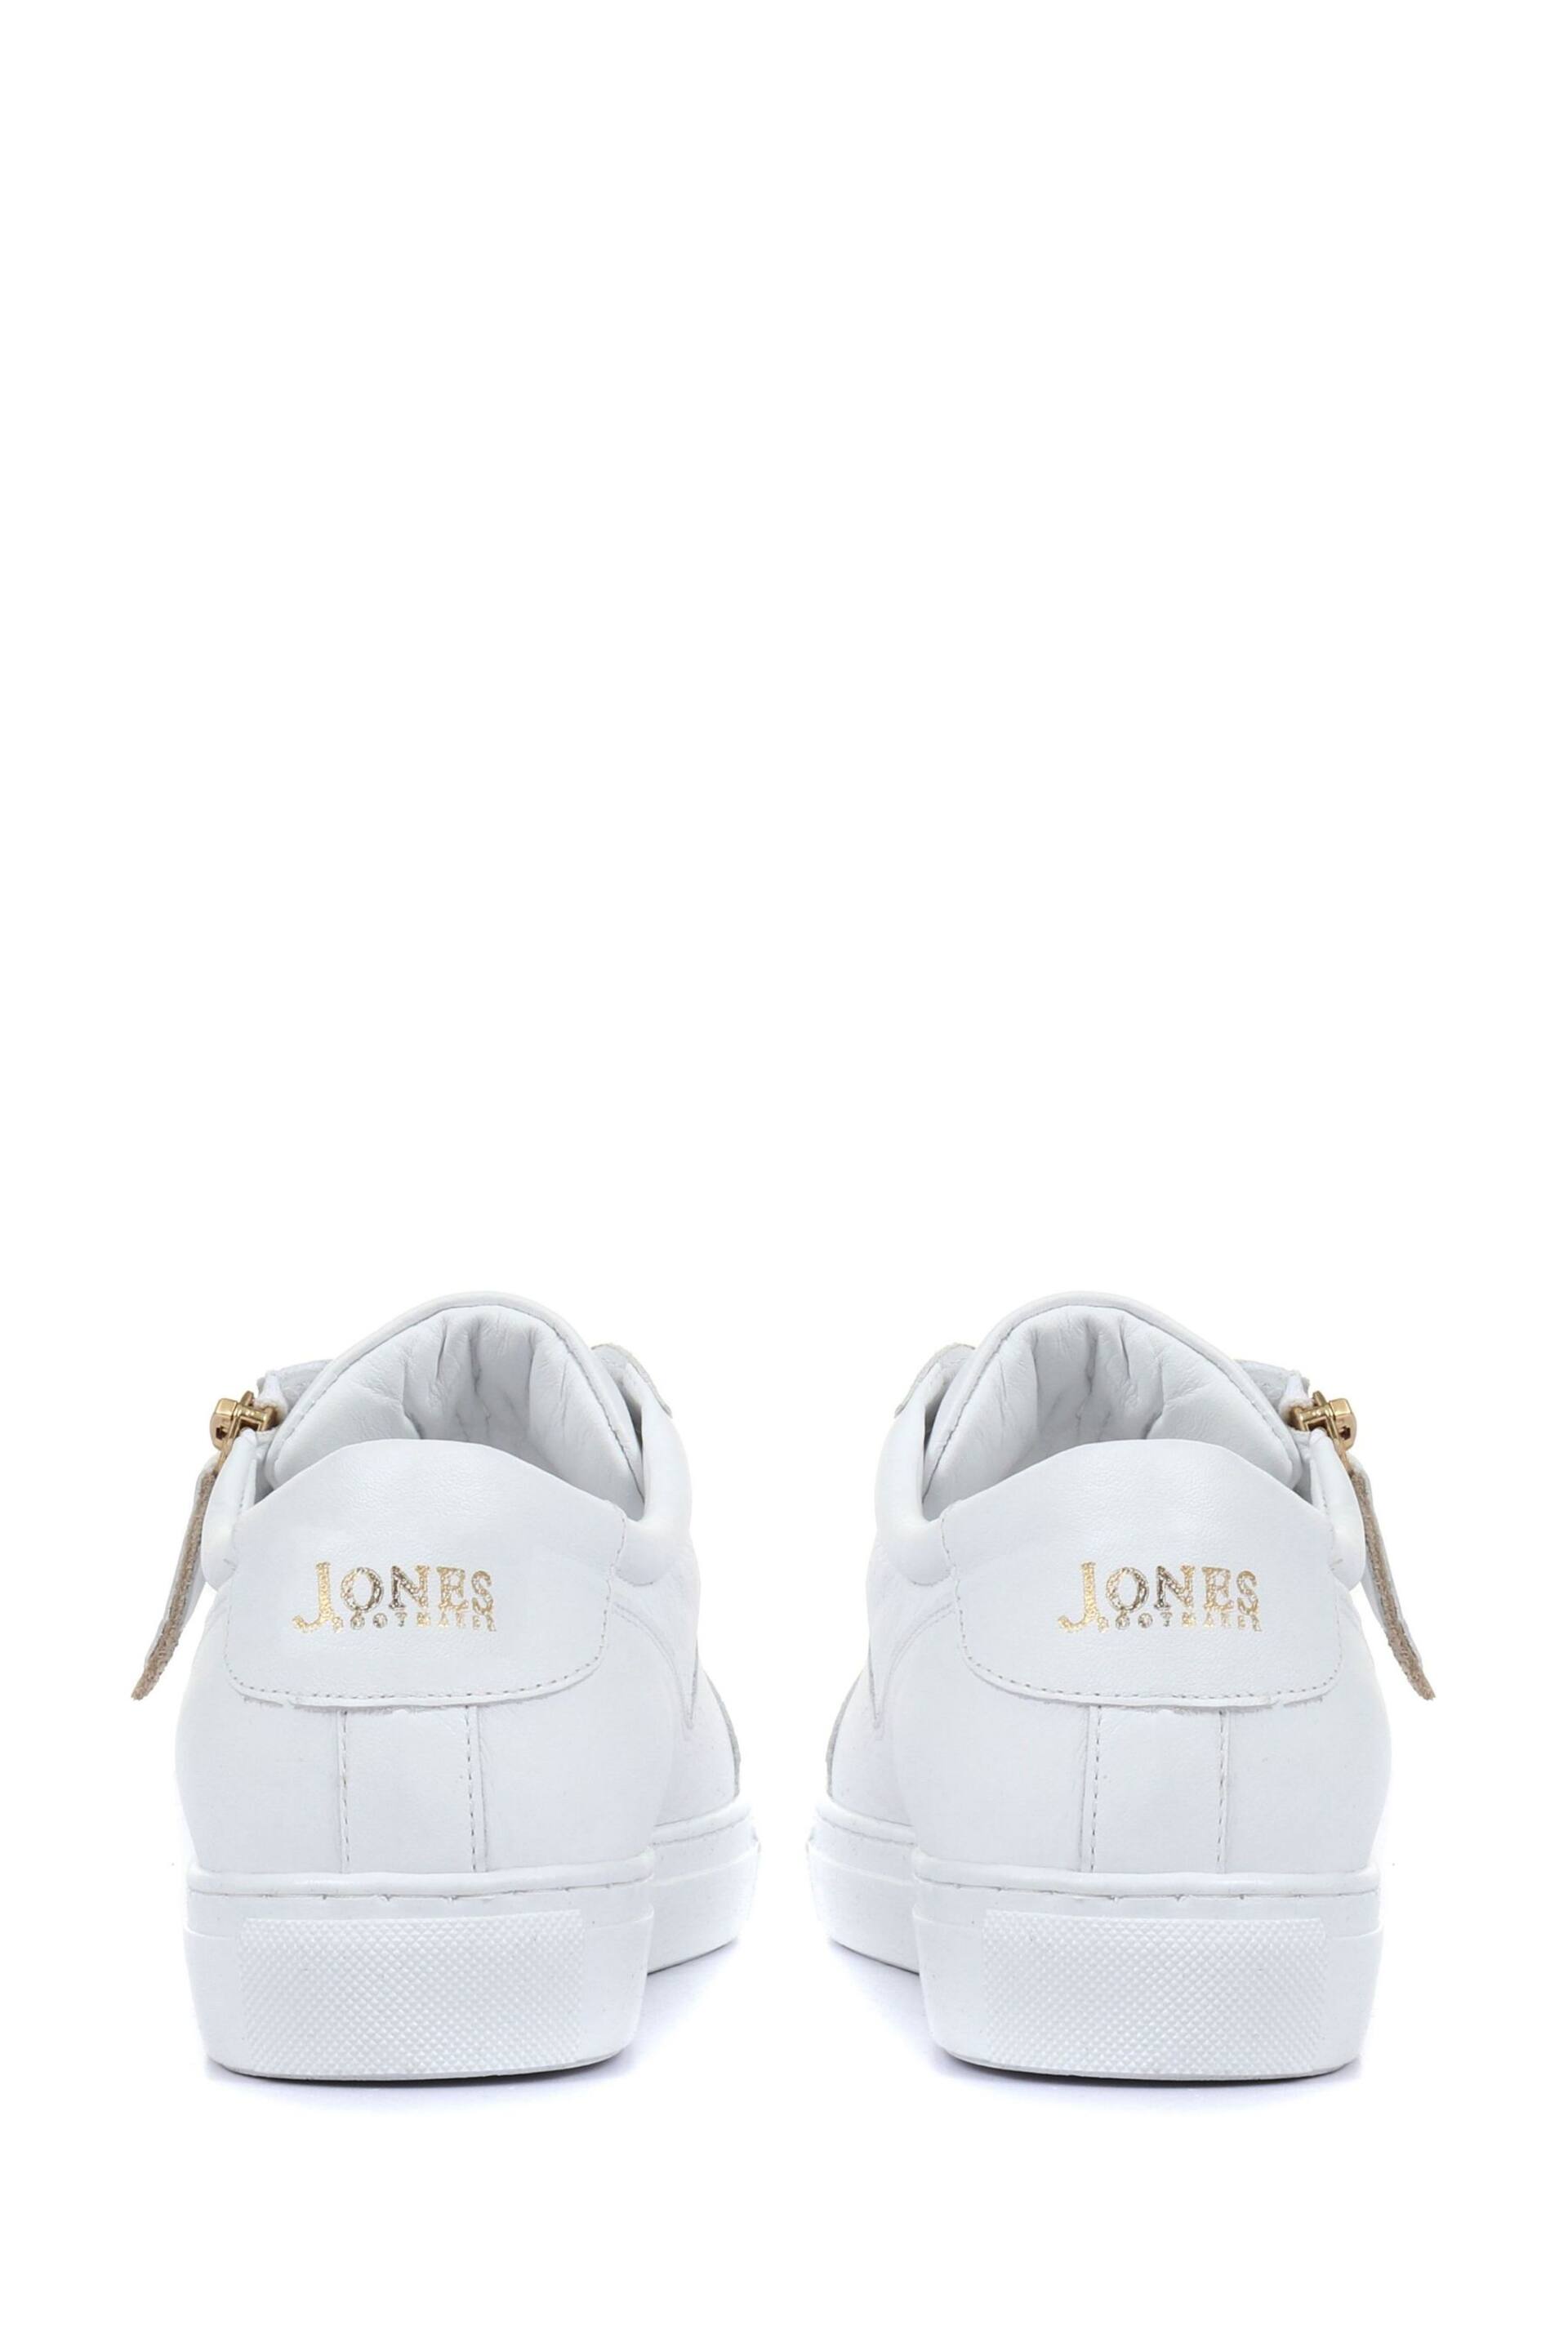 Jones Bootmaker Leather Lace-Up Trainers - Image 3 of 6